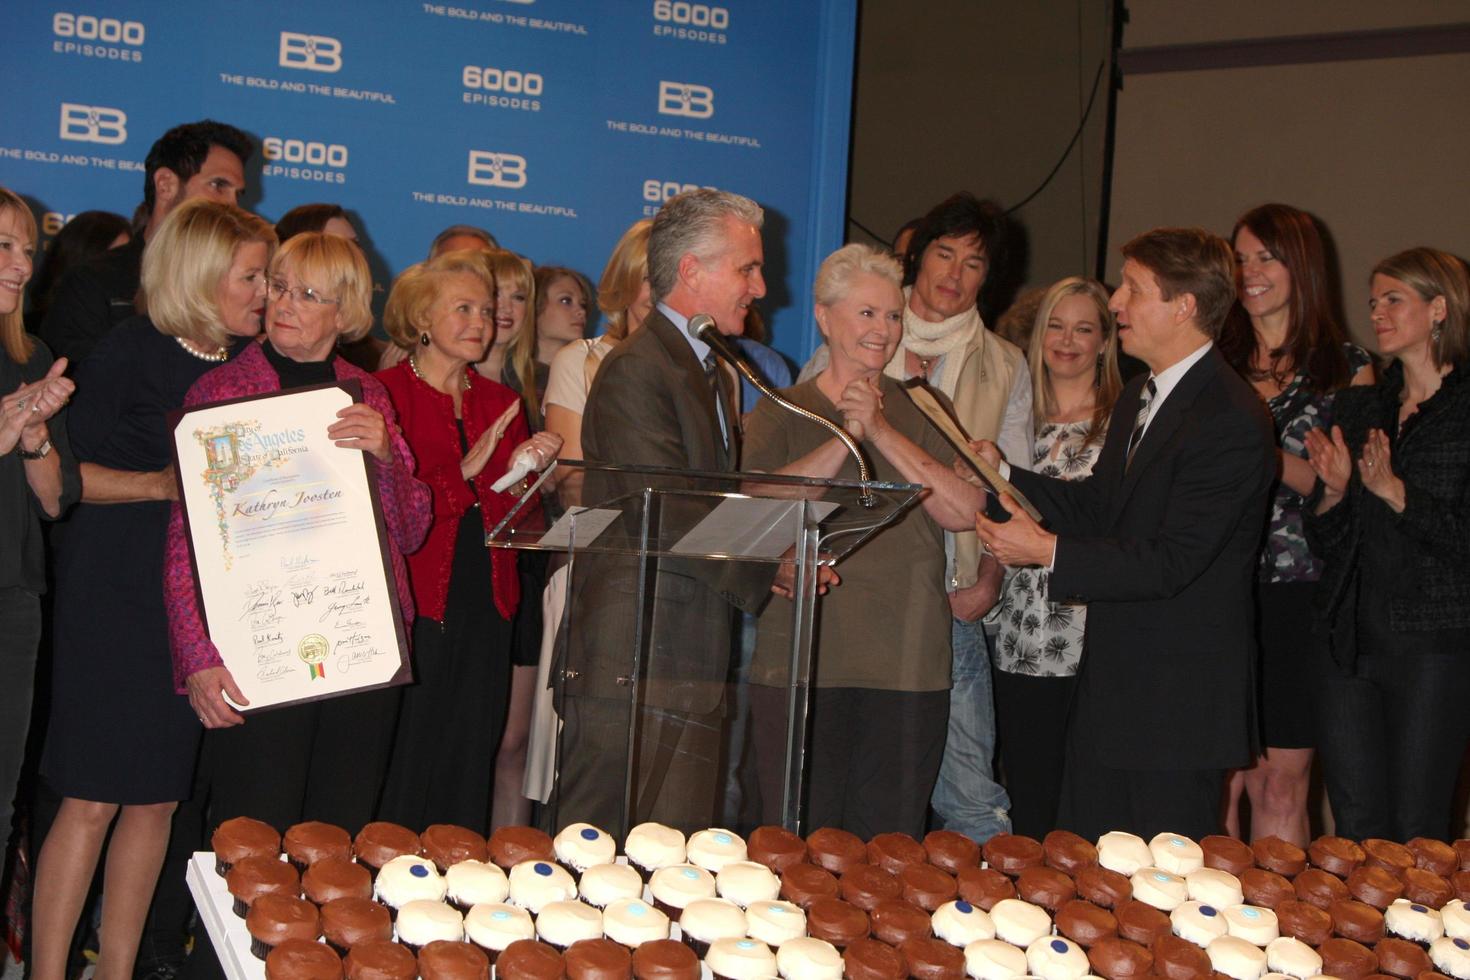 LOS ANGELES, FEB 7 - Kathryn Joosten, with Bold and Beautiful Cast, Brad Bell at the 6000th Show Celebration at The Bold and The Beautiful at CBS Television City on February 7, 2011 in Los Angeles, CA photo